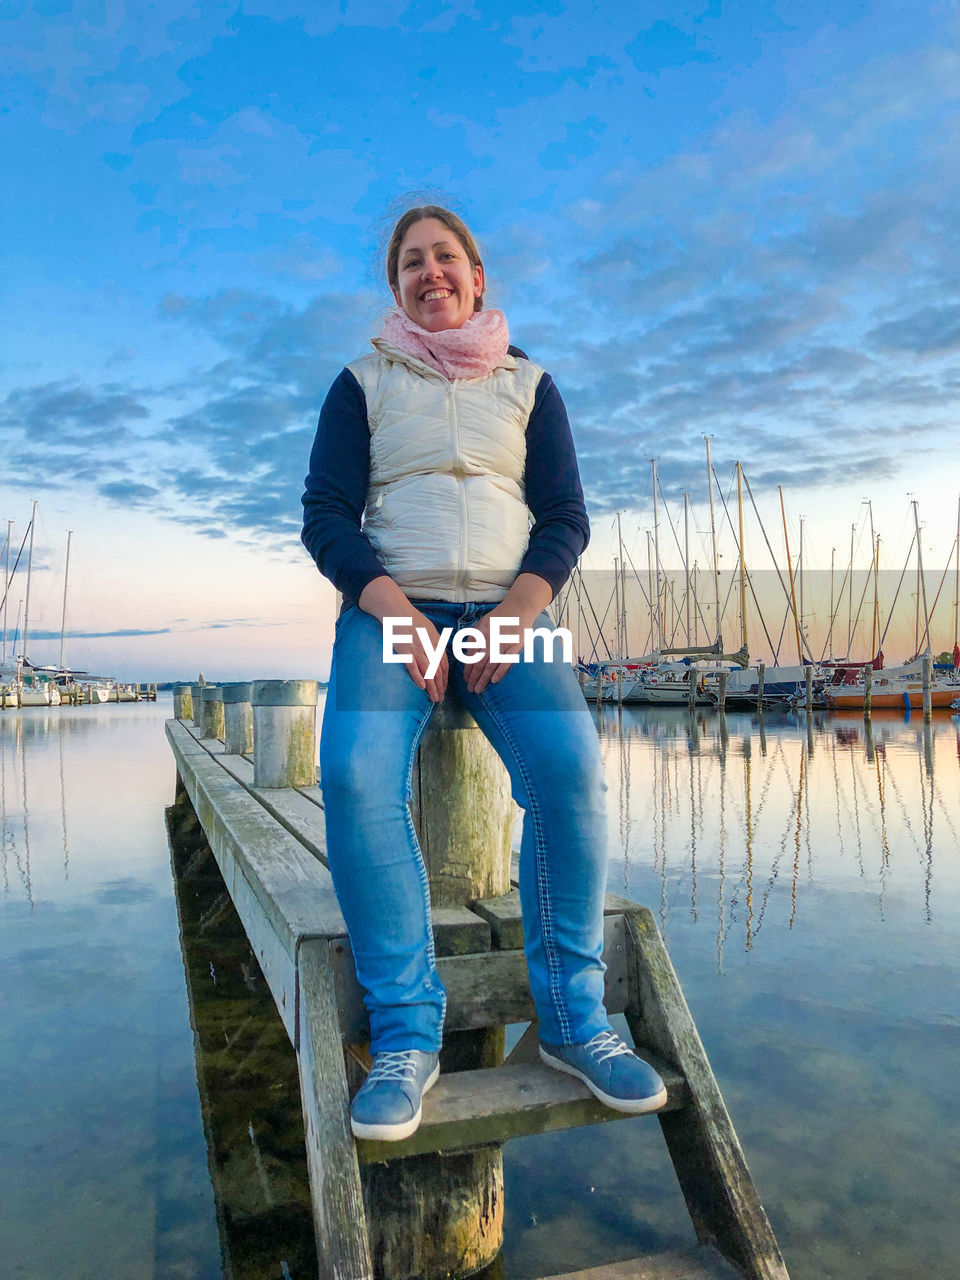 water, one person, full length, adult, sky, blue, nature, women, looking at camera, portrait, casual clothing, sea, smiling, front view, sitting, reflection, jeans, emotion, lifestyles, happiness, vacation, leisure activity, pier, day, cloud, clothing, footwear, wood, relaxation, female, young adult, person, outdoors, tranquility, beauty in nature, standing, nautical vessel, blond hair, jetty